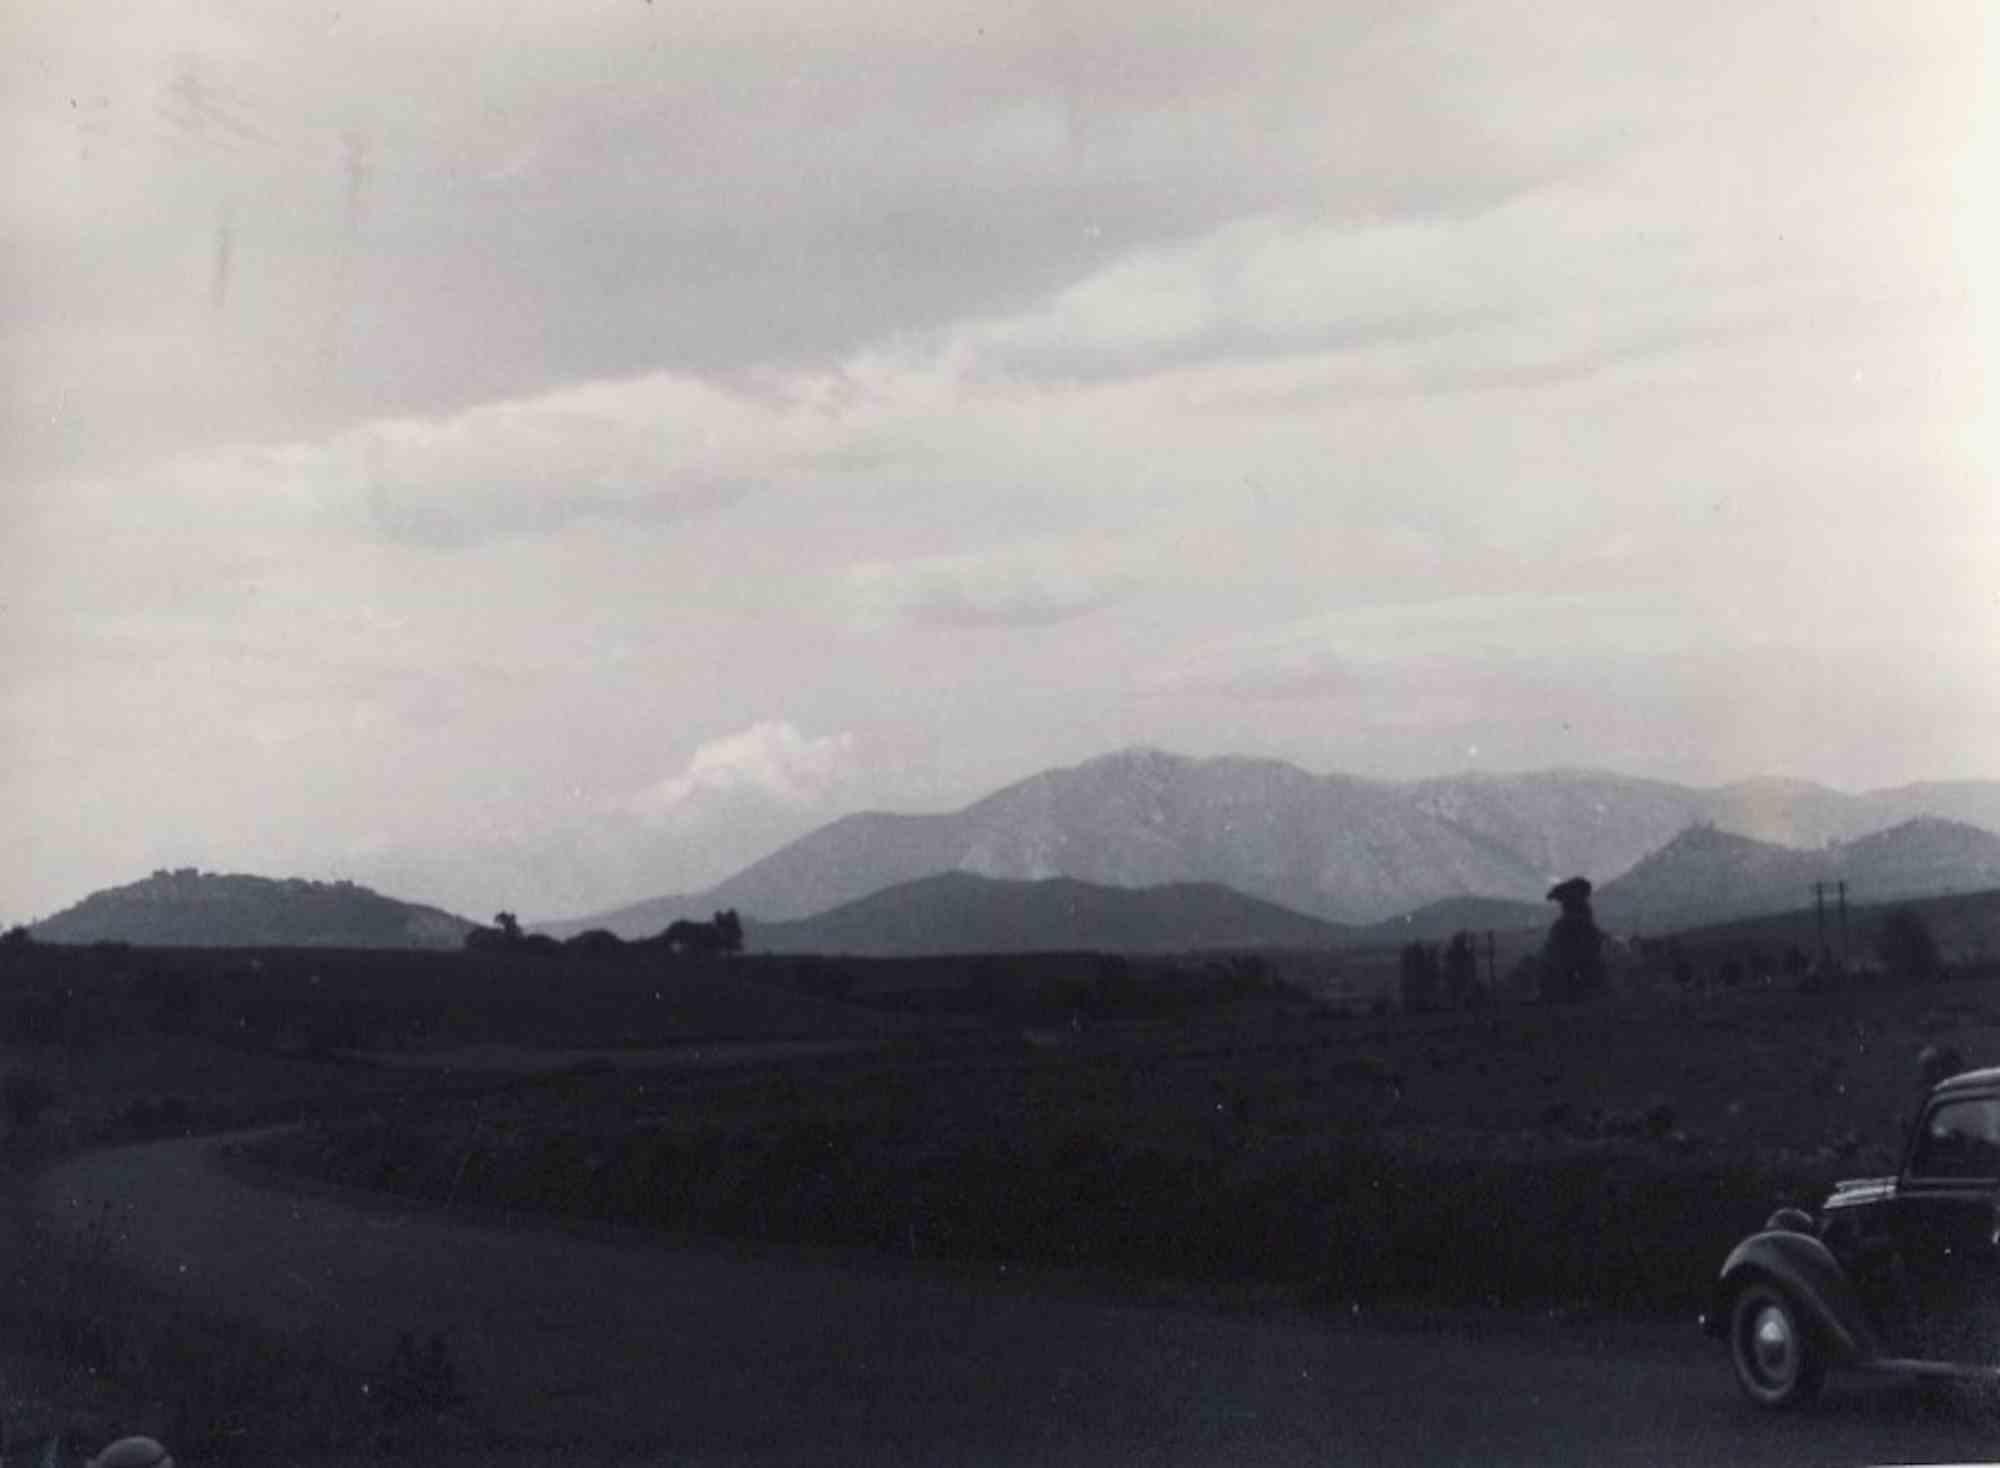 Unknown Figurative Photograph - Old days Photo - Mountain - Vintage photo - mid-20th Century